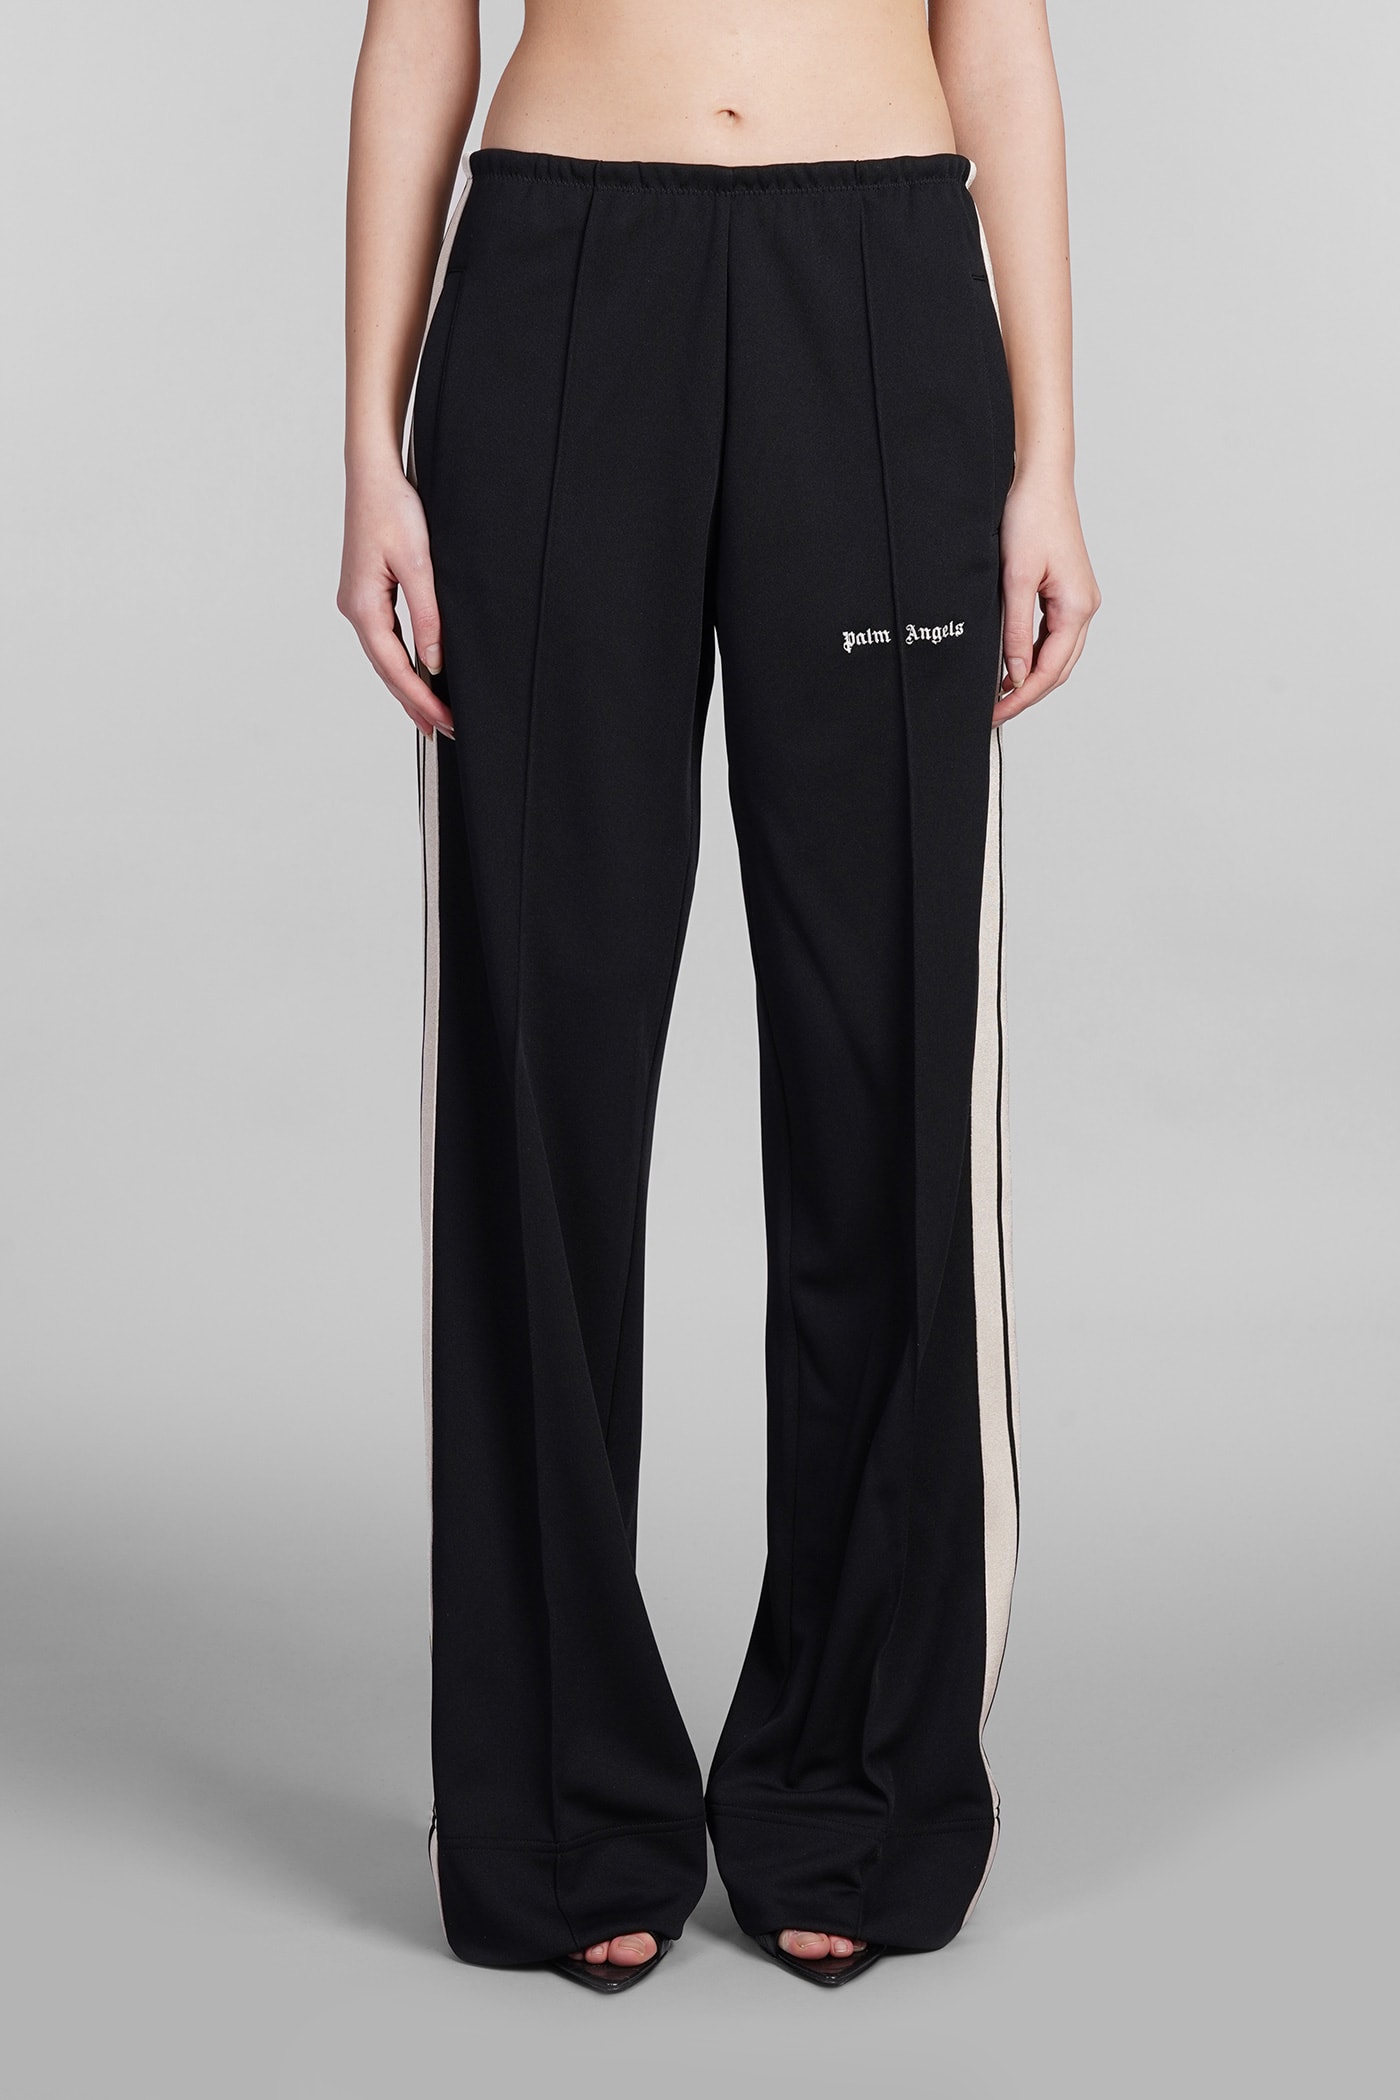 Palm Angels Trousers In Black Polyester